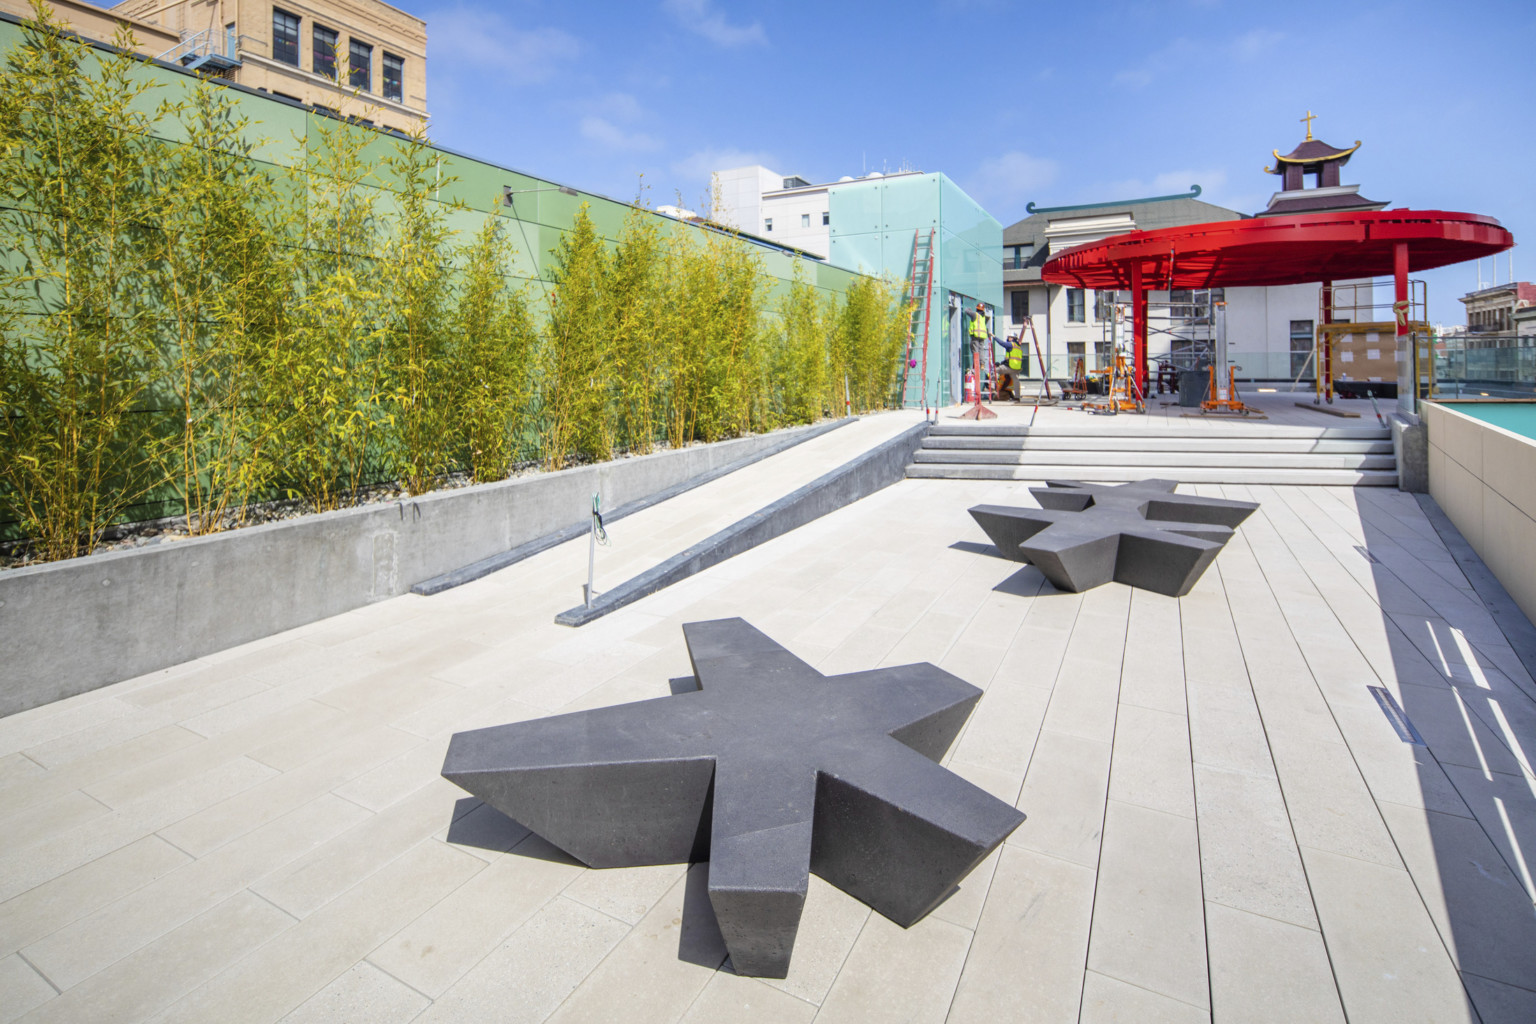 Organic shaped benches in walkway with ramp and steps to rooftop plaza with red canopy. Trees grow along green tile left wall